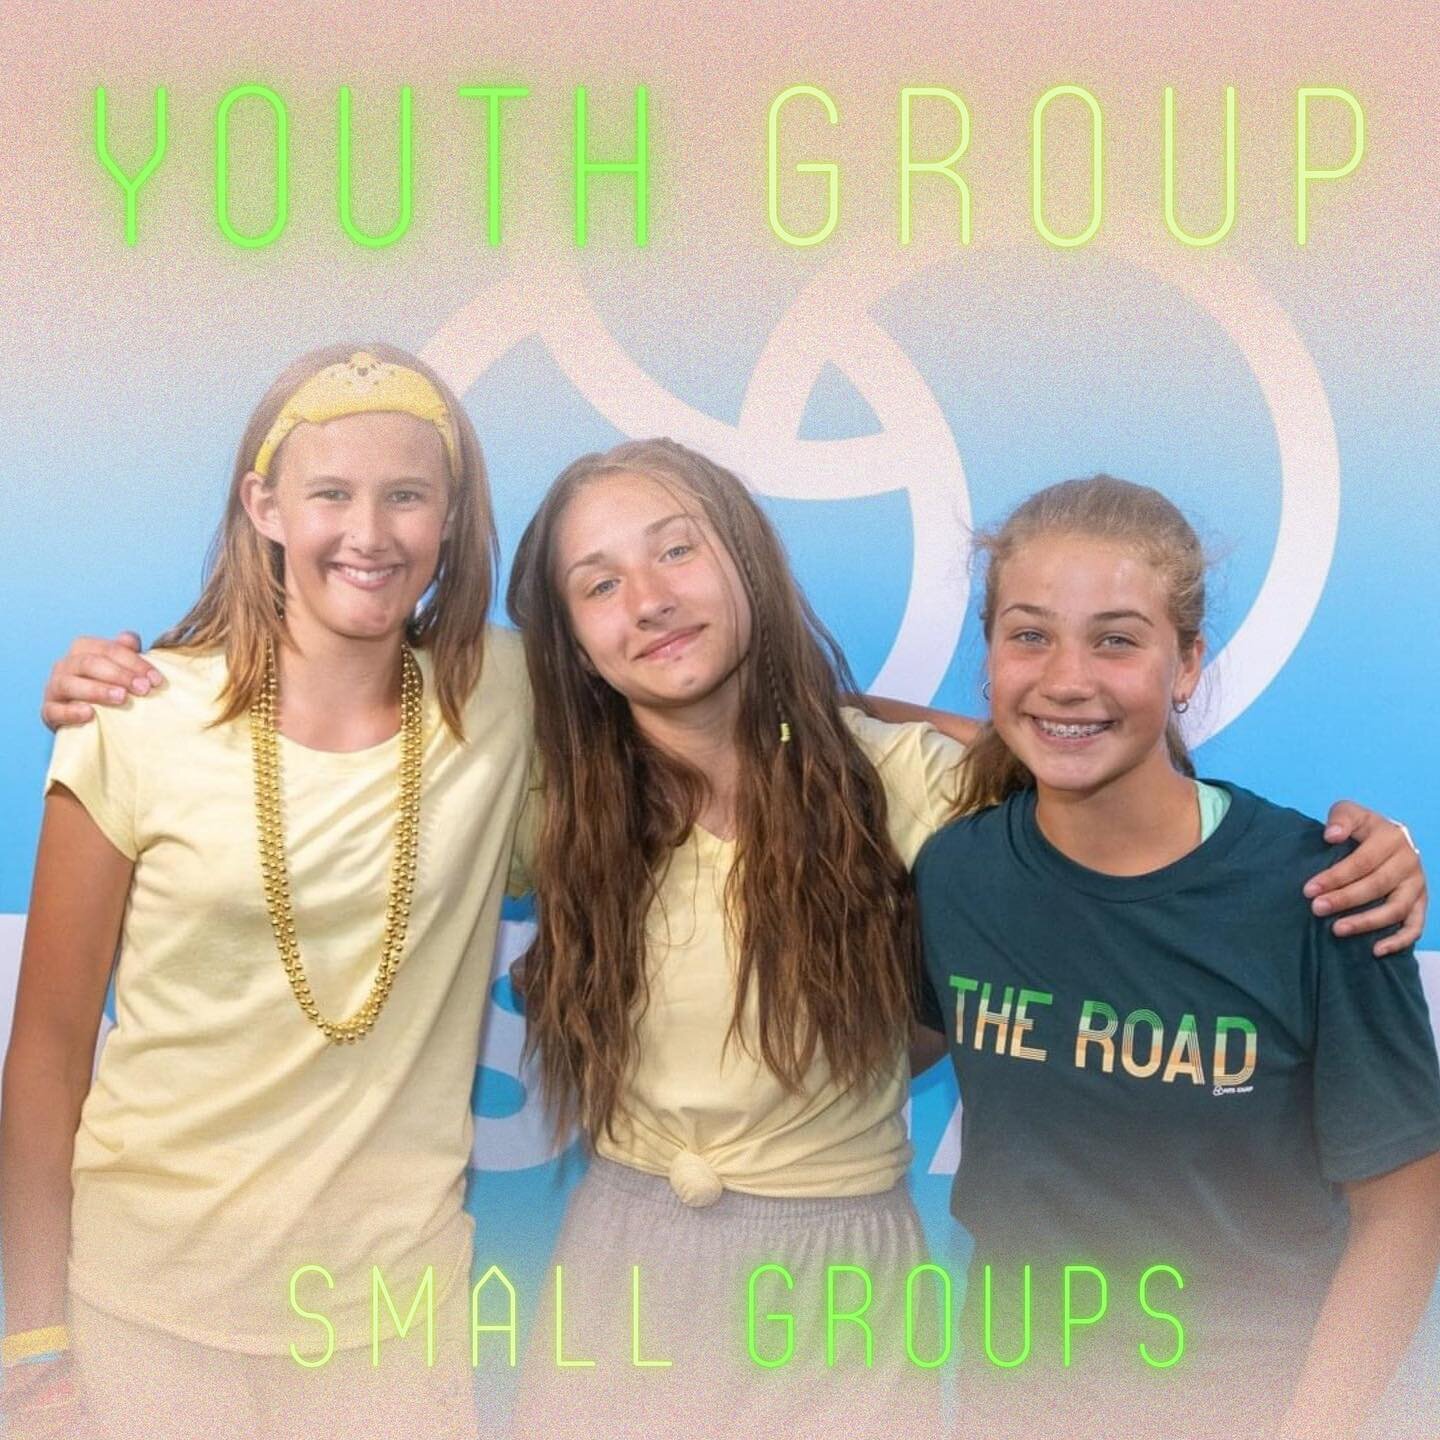 🚨Reminder!!🚨 Youth Group small groups will be meeting this Monday from 6-8. Here&rsquo;s where your group is meeting:⁣
⁣
HS Boys - Zach&rsquo;s House ⁣
HS Girls - Natalie&rsquo;s House ⁣
MS Boys - TBA ⁣
MS Girls - Zoe&rsquo;s House⁣
⁣
Text Zach @ 3